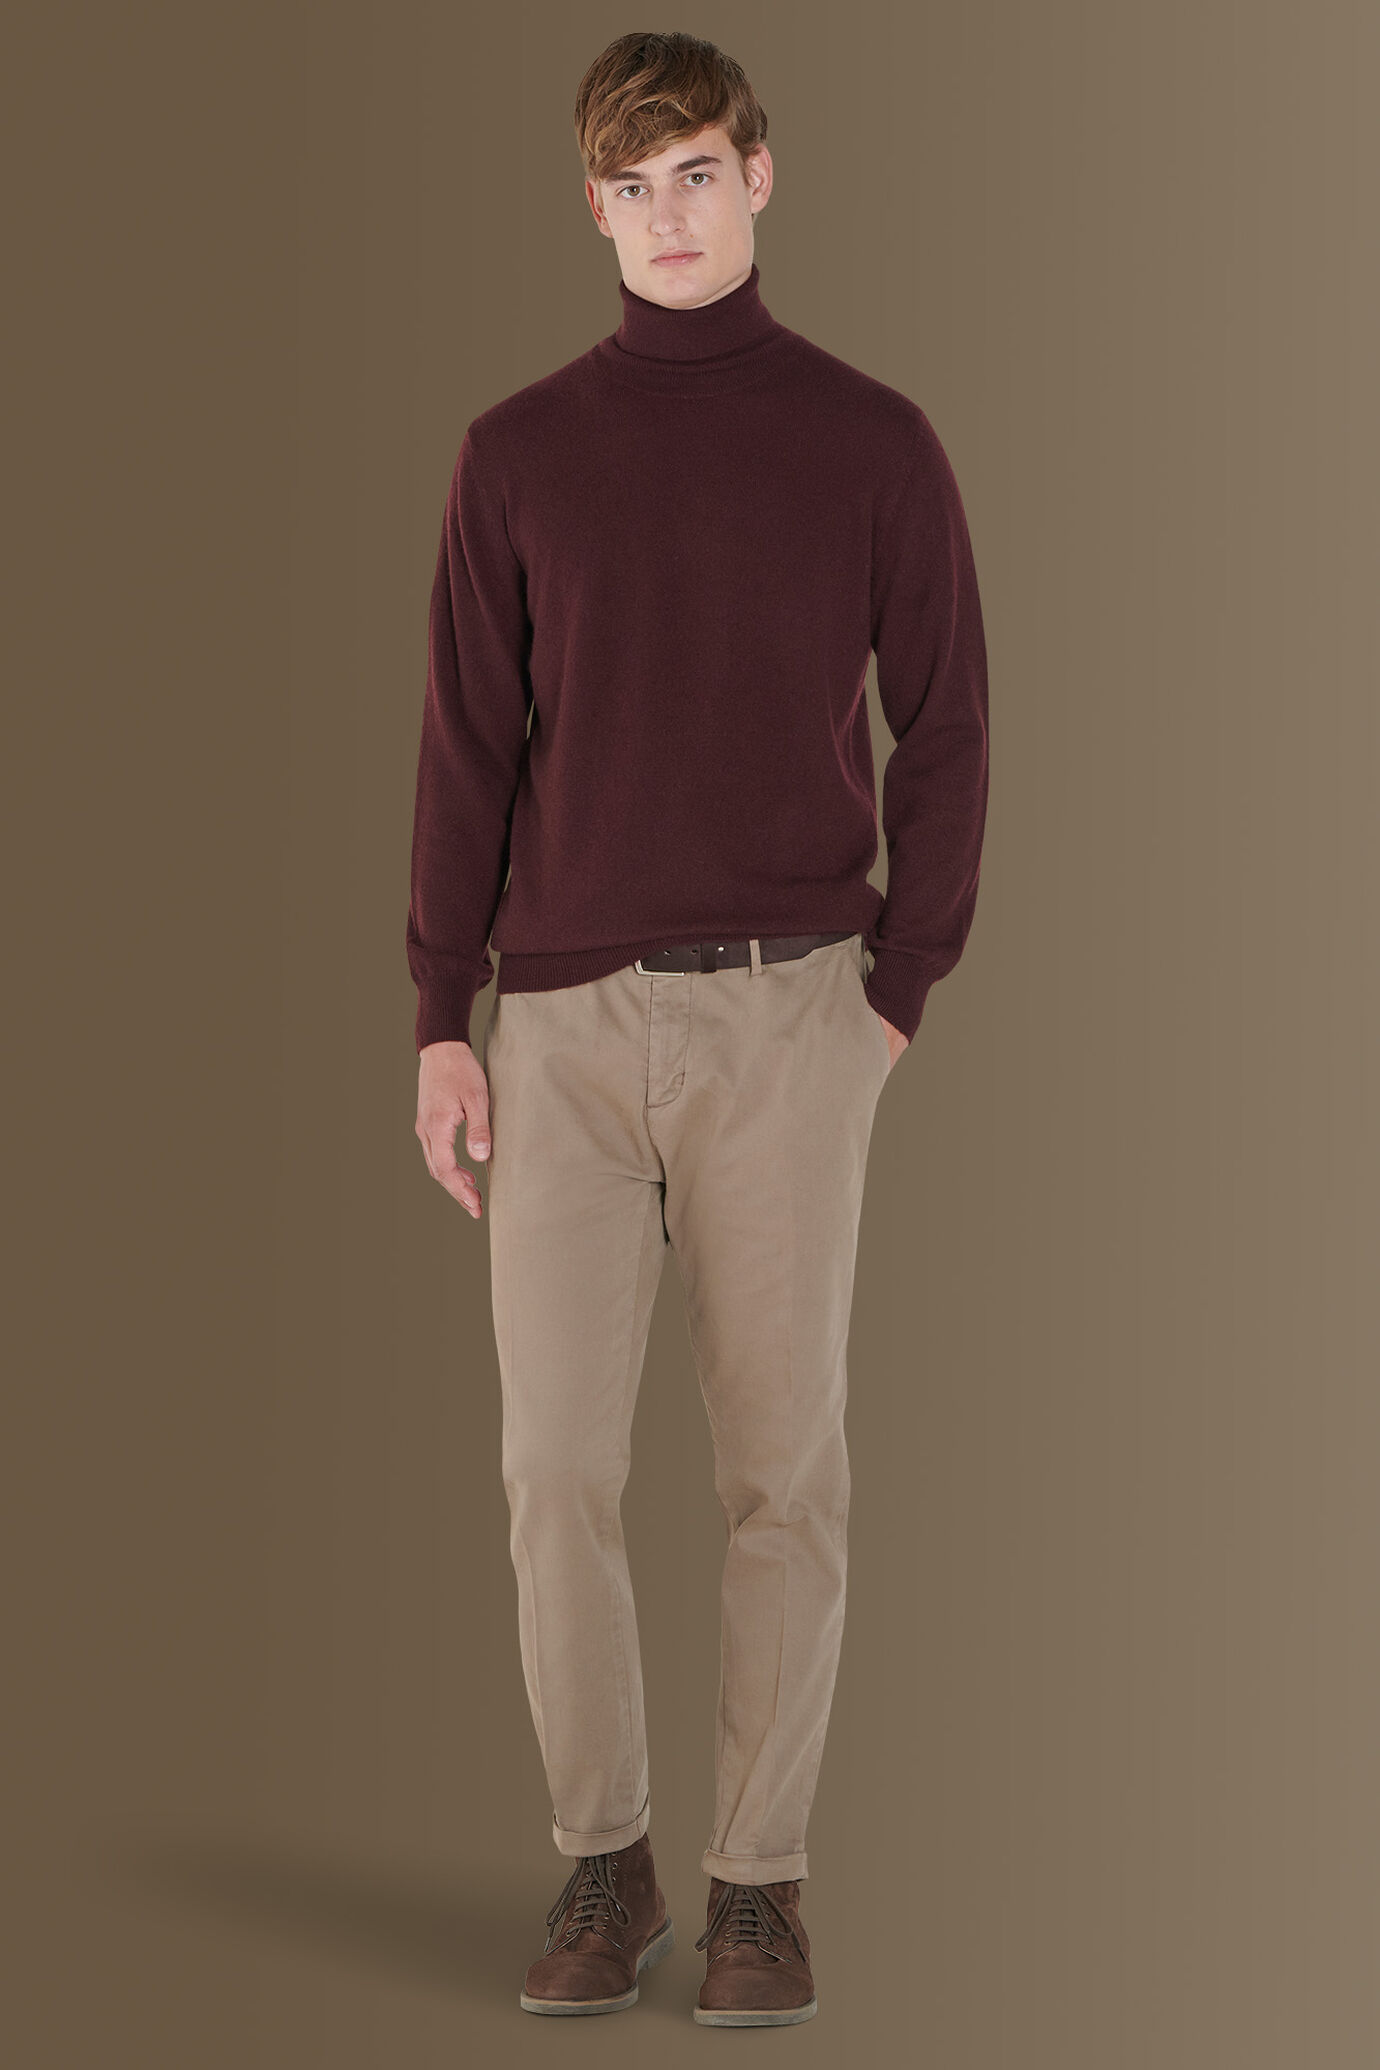 Classic chino trousers twill stretch construction